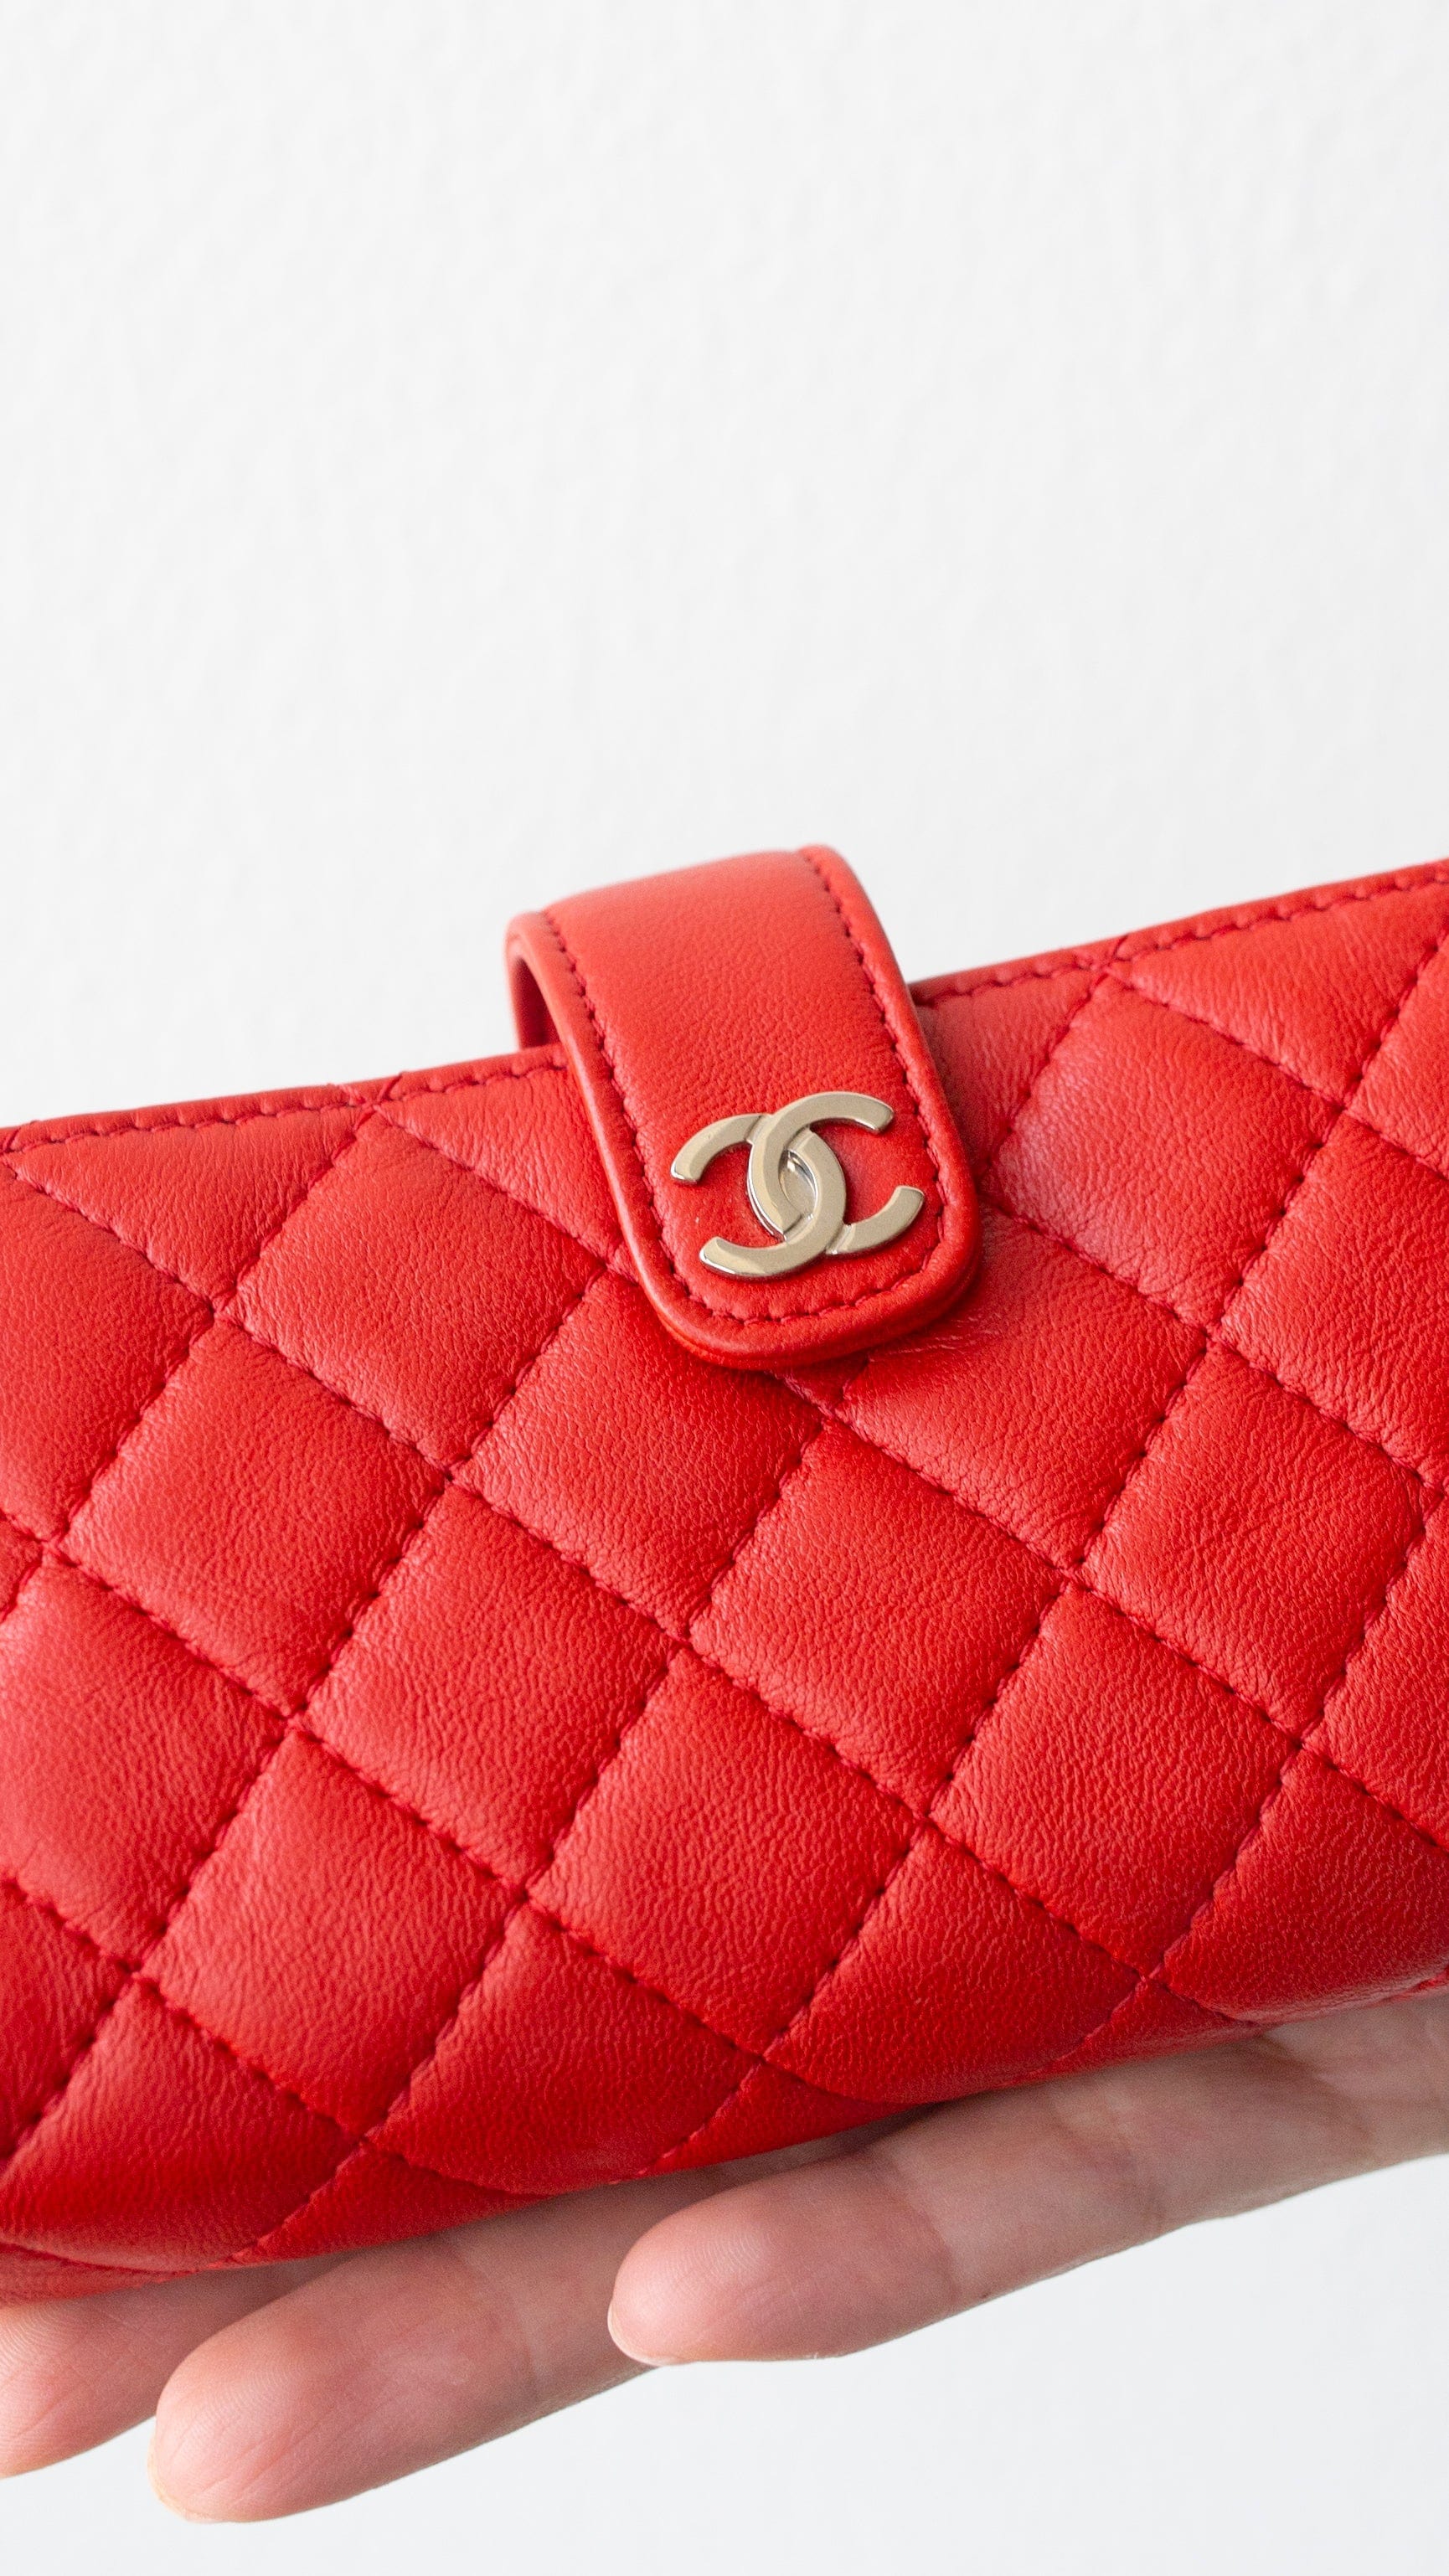 Chanel Chanel red lambskin phone pouch - AWC1858